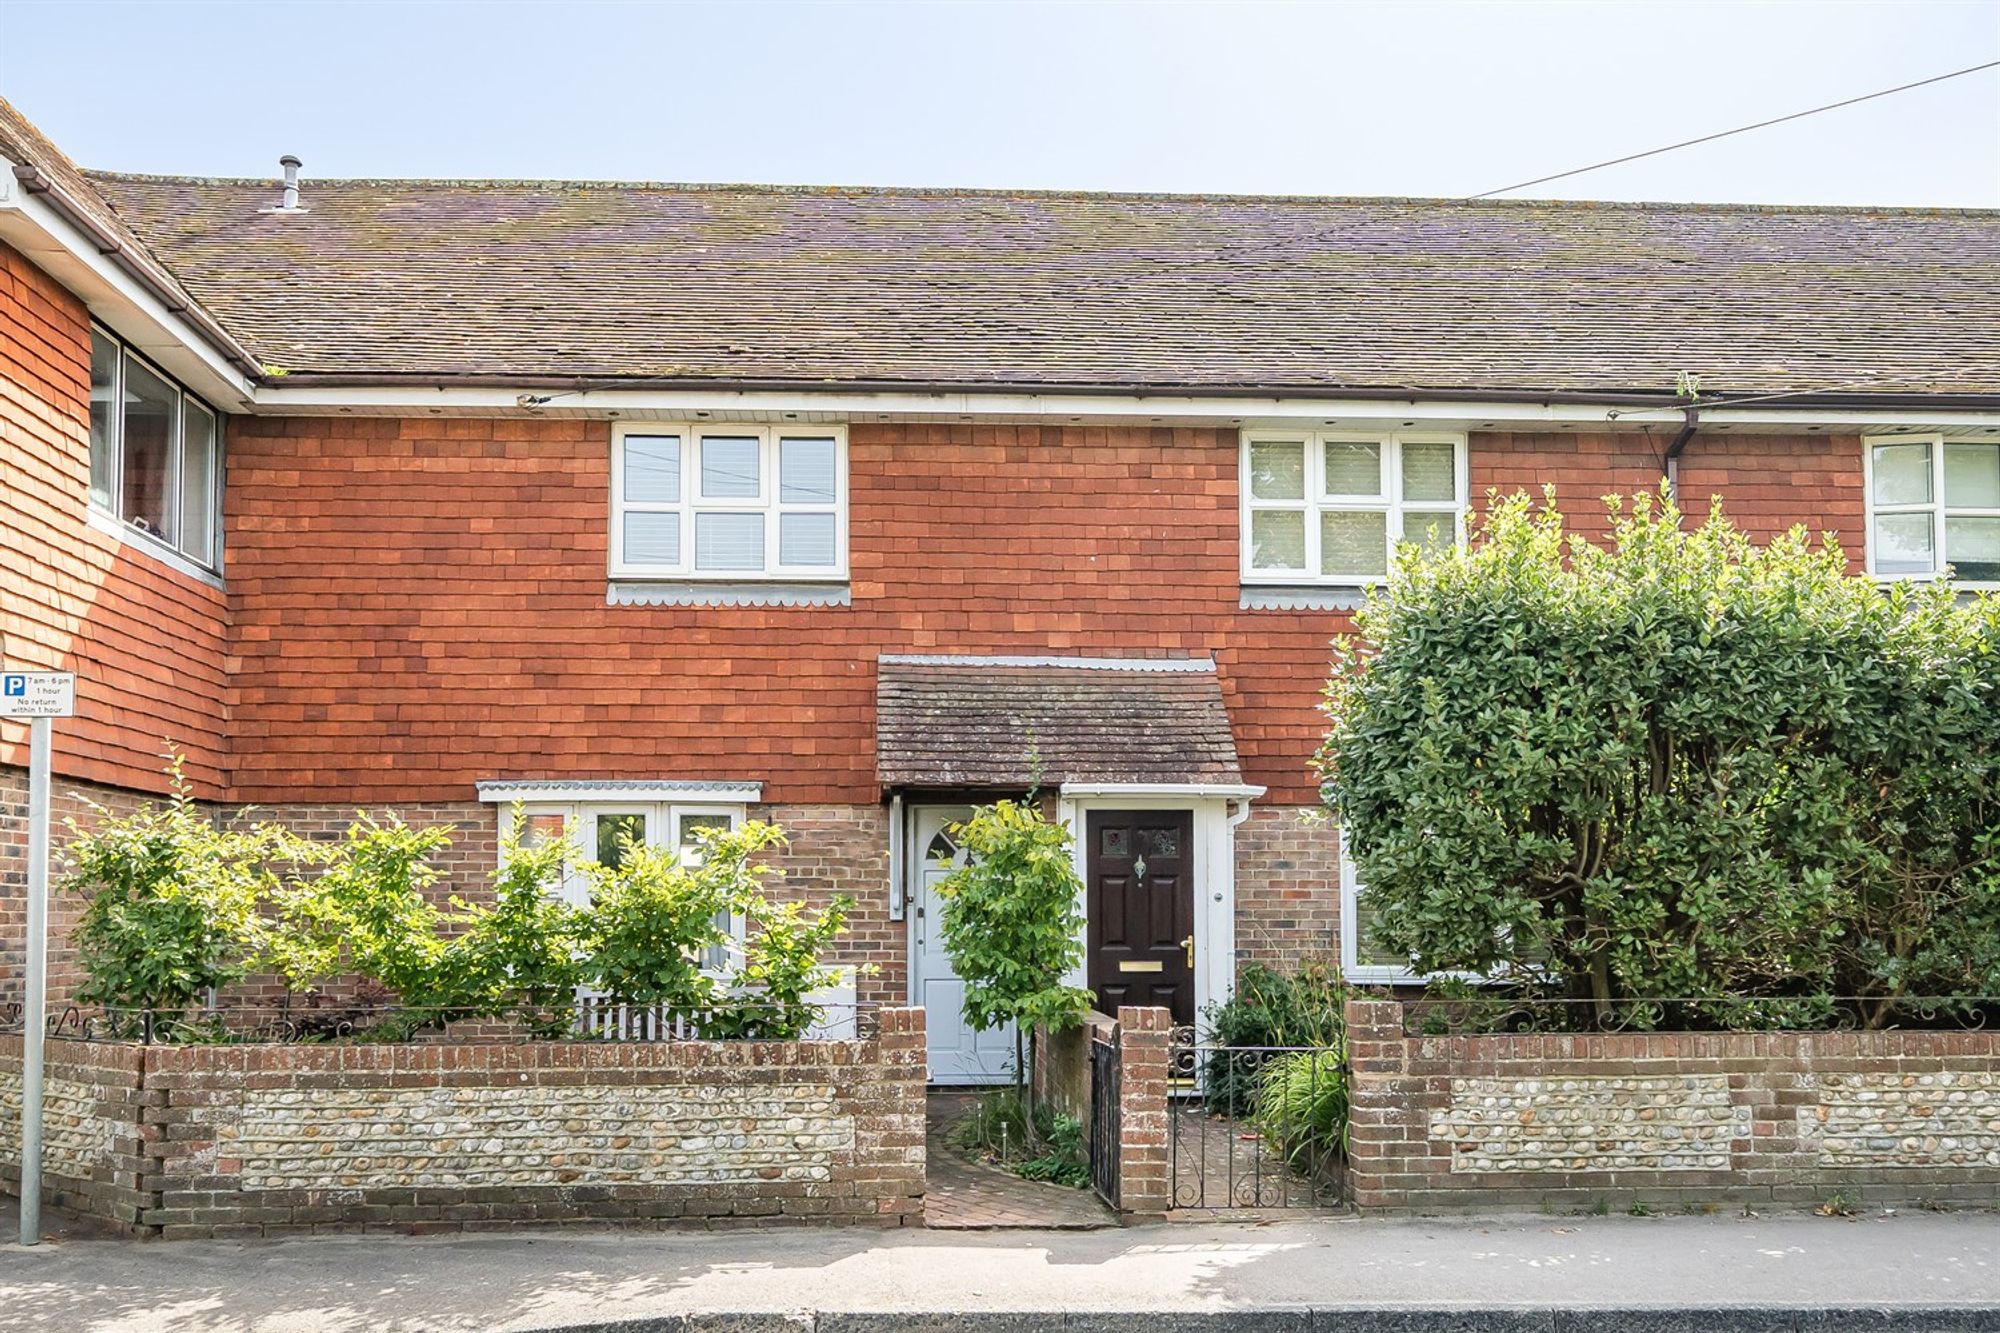 Rookwood Road, West Wittering, PO20